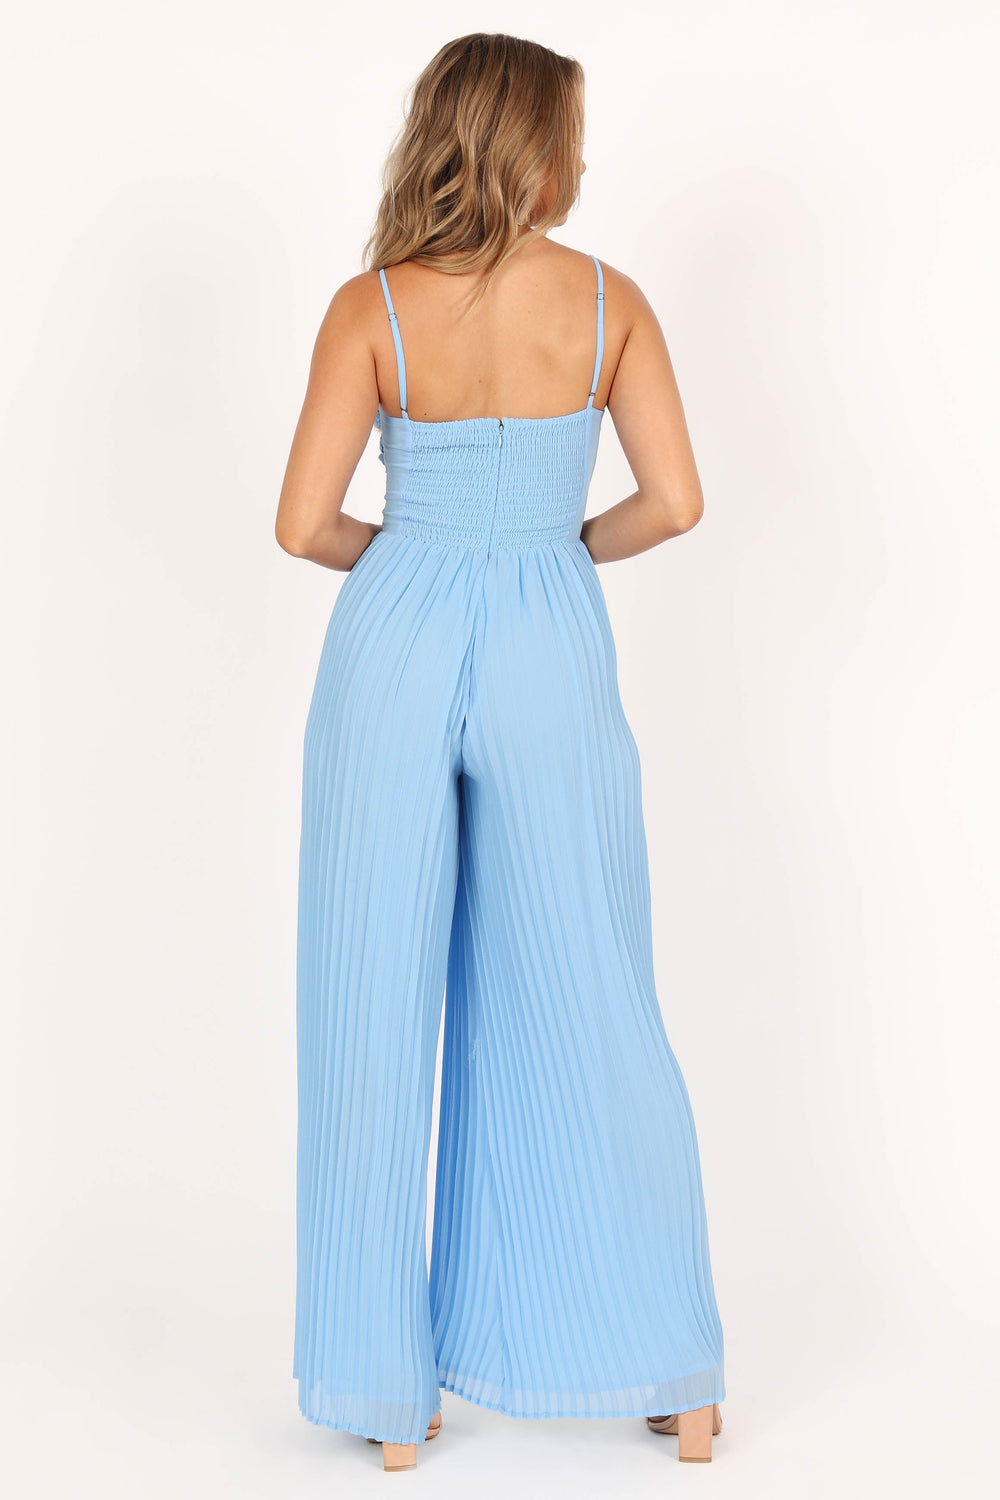 Petal and Pup USA Rompers Alice Wide Leg Jumpsuit - Blue